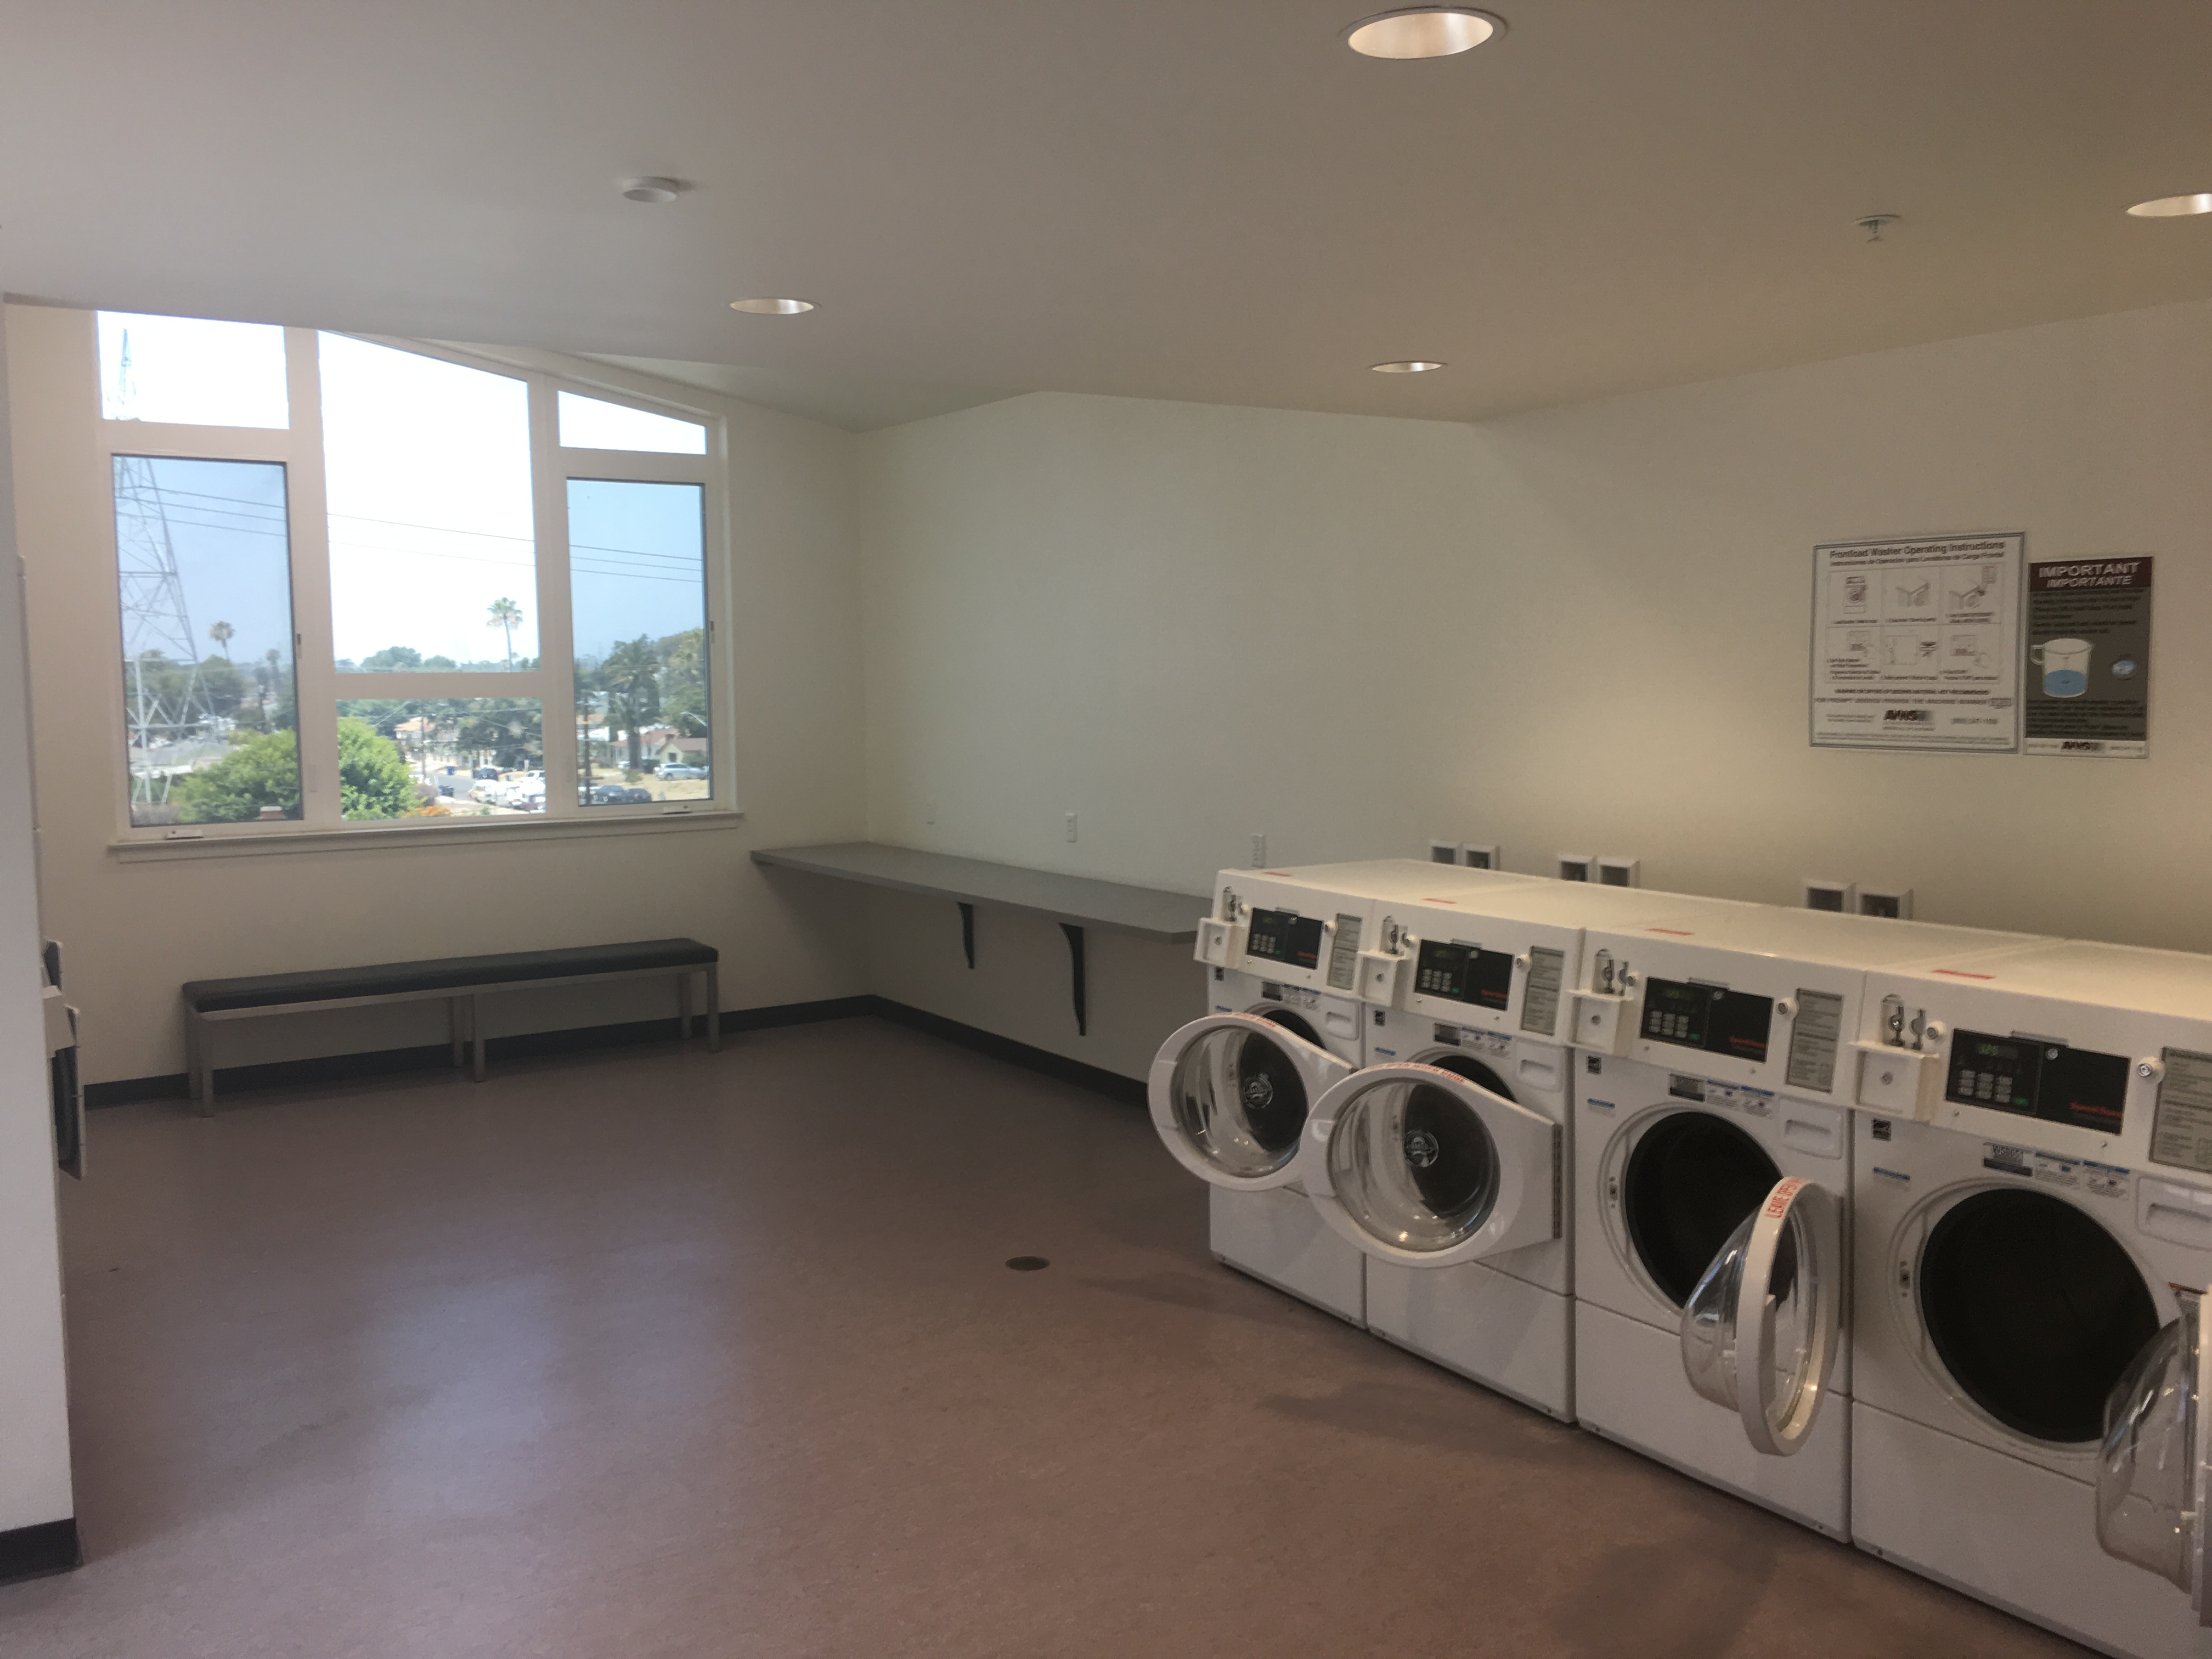 interior view of the fourth floor Laundry Room in the PSH Campus showing four washers against the wall next to a long table attached to the wall. To the side of the table is a long bench to sit with a large window above sectioned in six panels